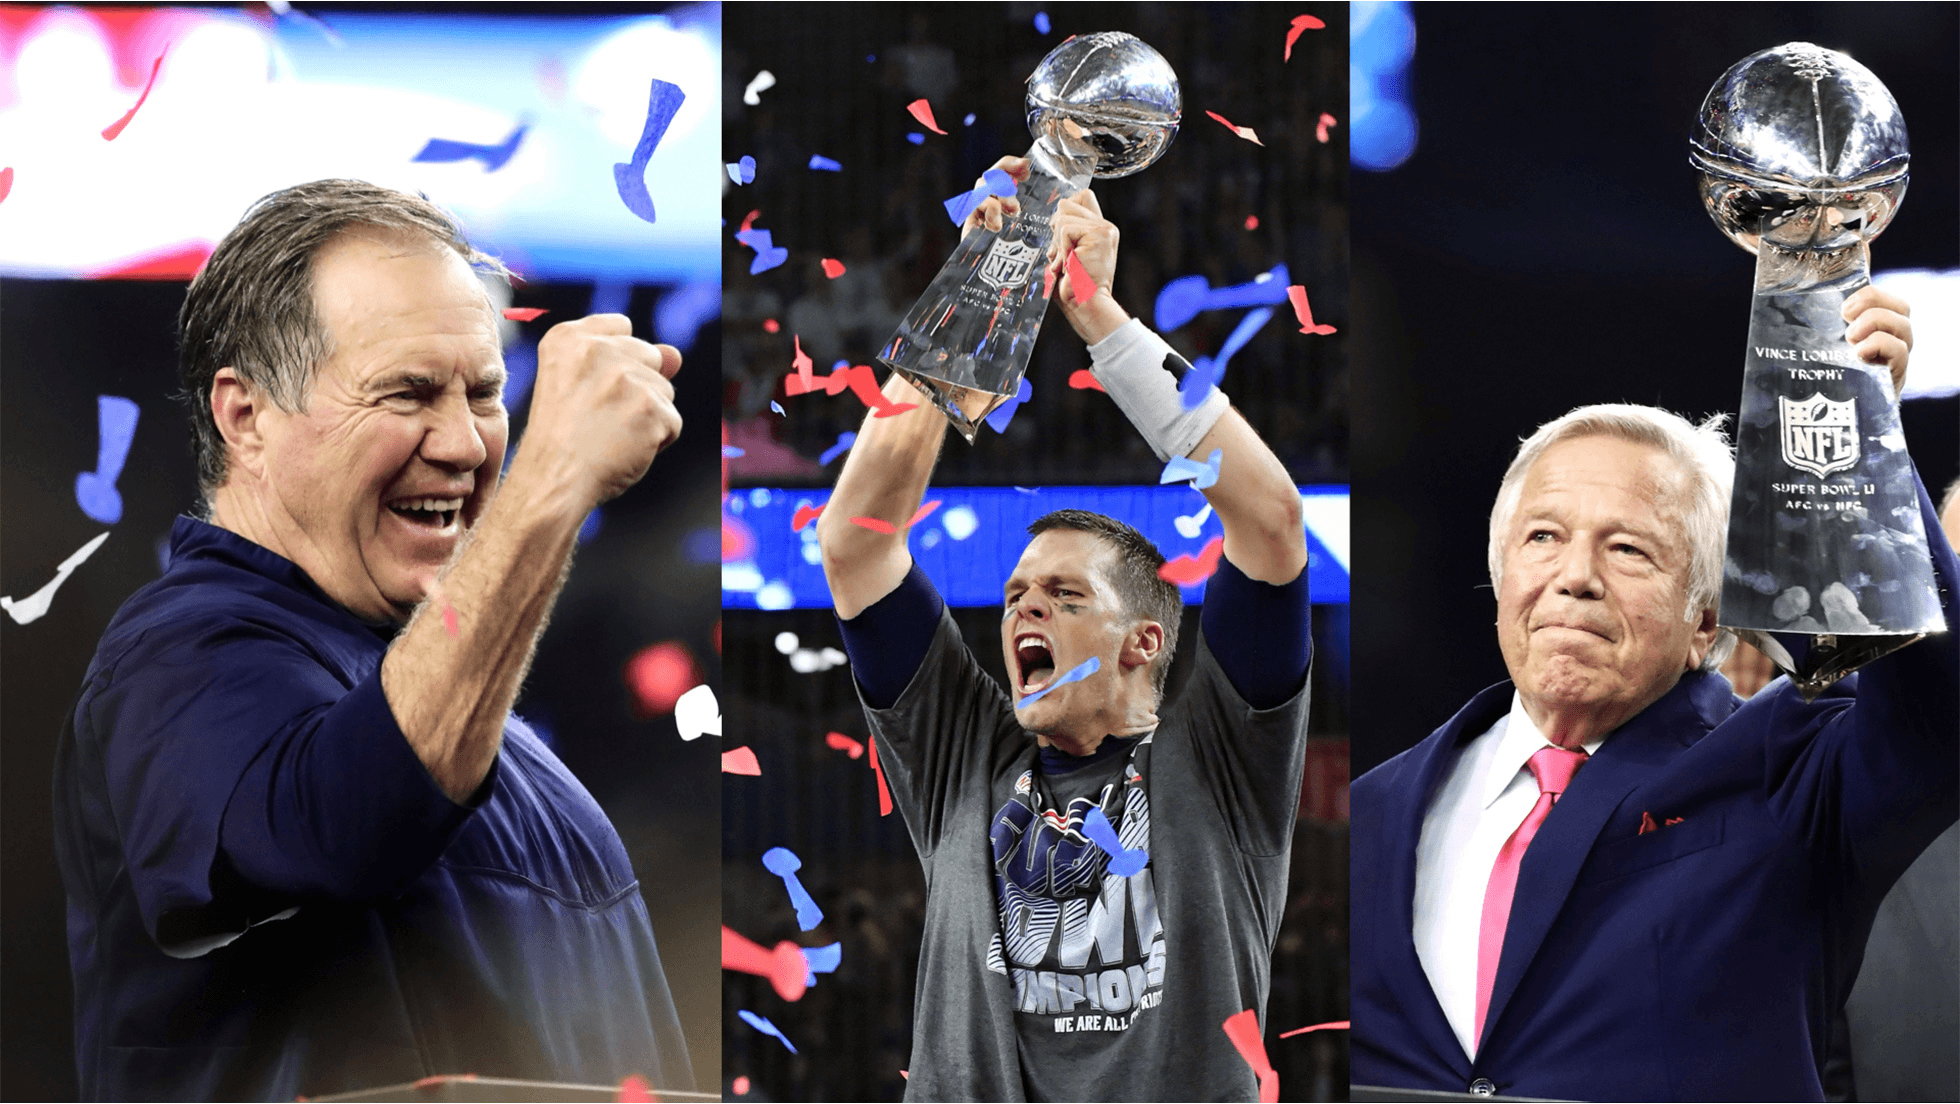 ‘The Dynasty’ 10 Part Docuseries About the New England Patriots in the Works for Apple TV+